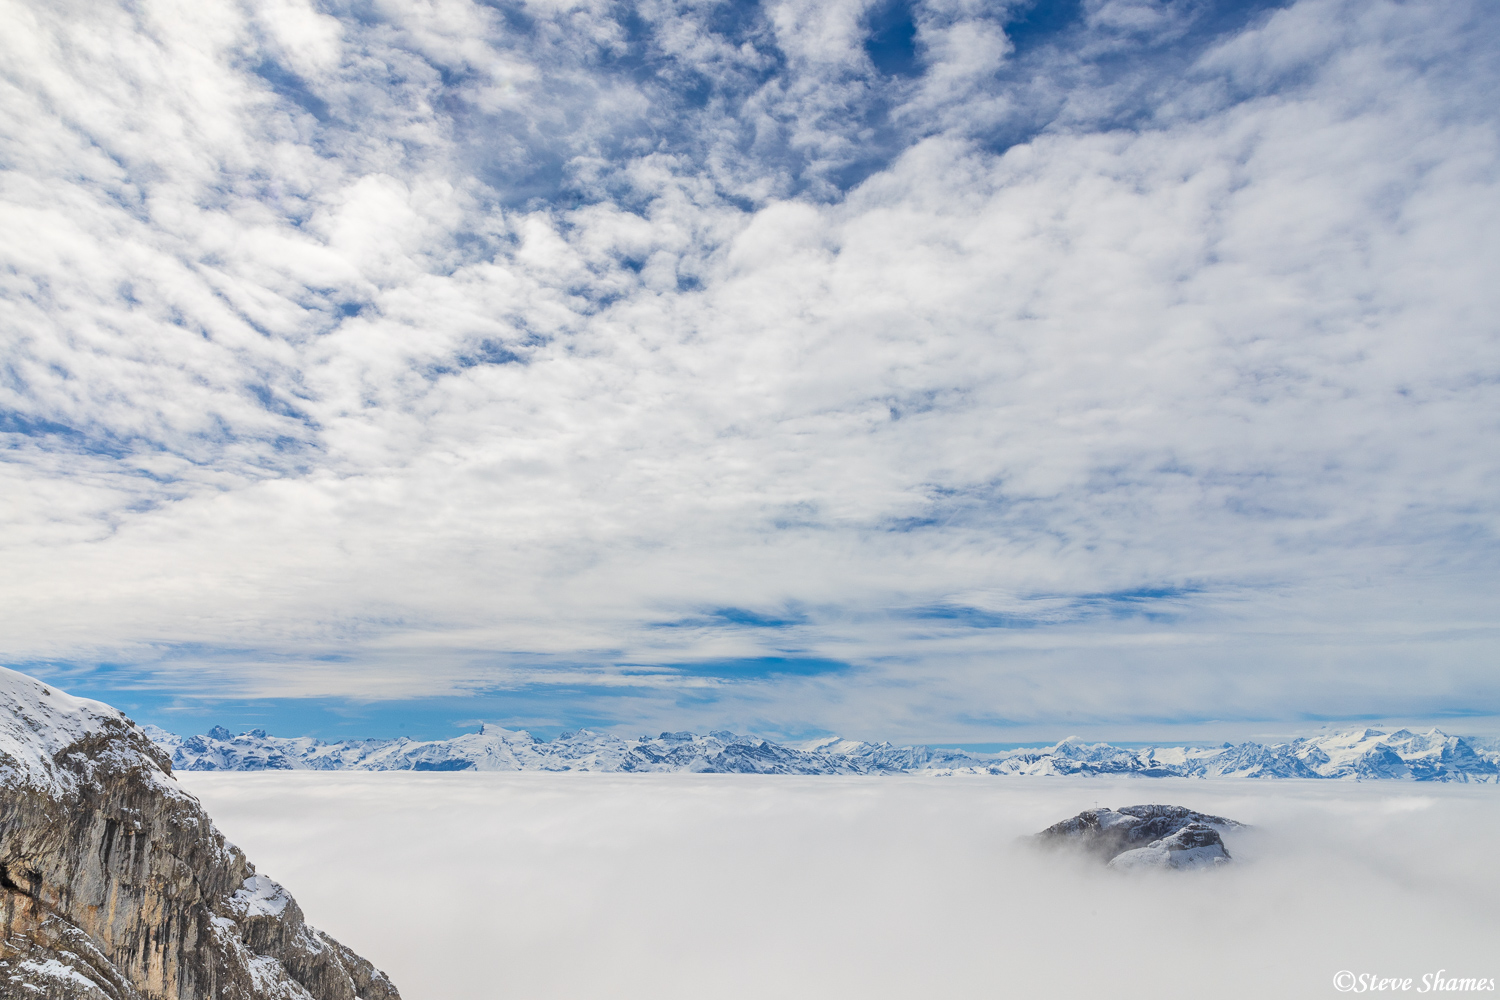 Swiss Alps view from Mt. Pilatus above a sea of clouds. Luckily, the skies cleared for about an hour above the low clouds, and...